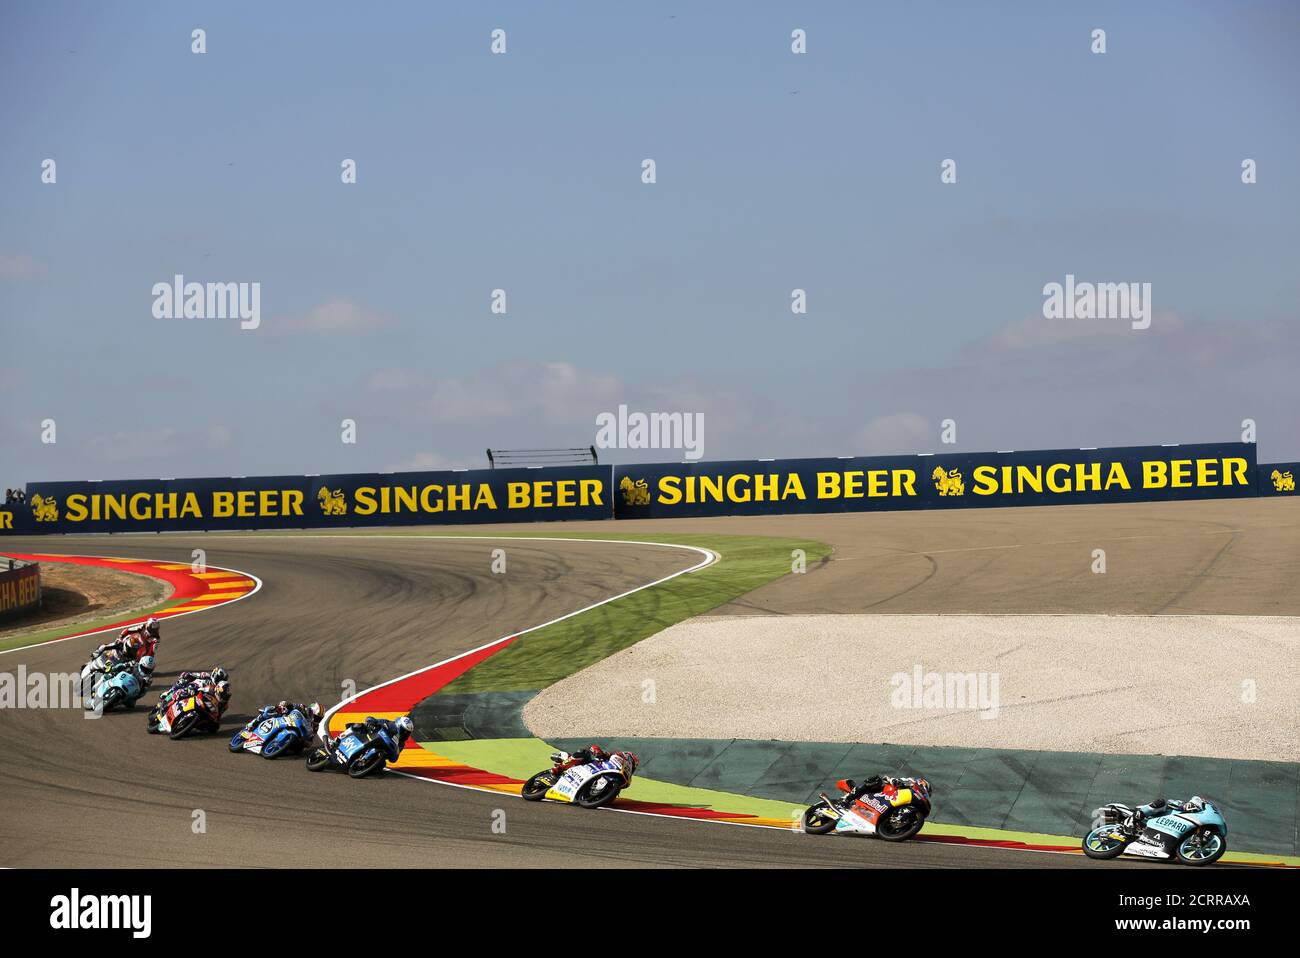 Page 3 - Danny Kent High Resolution Stock Photography and Images - Alamy